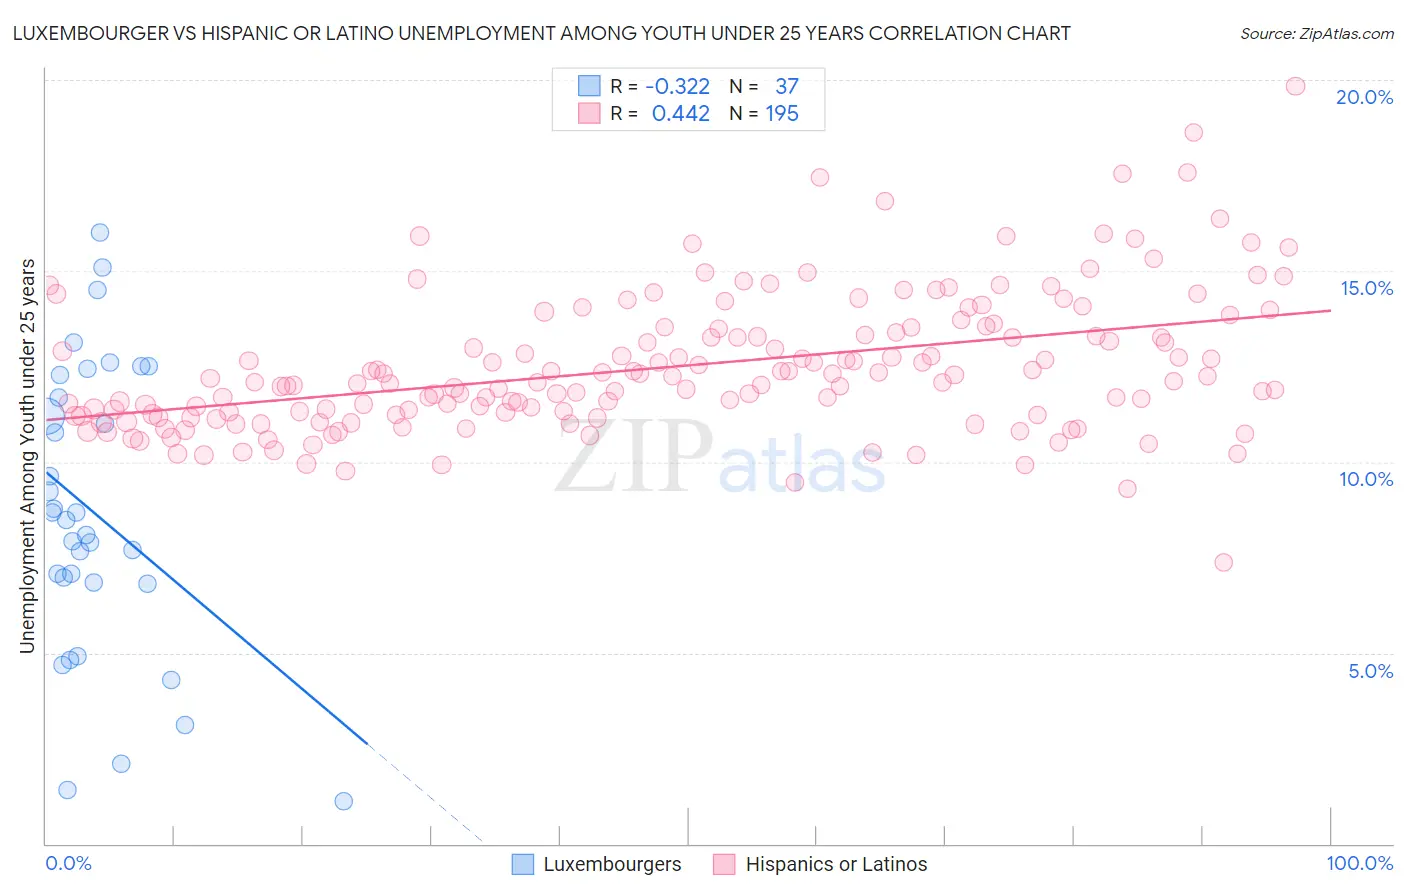 Luxembourger vs Hispanic or Latino Unemployment Among Youth under 25 years